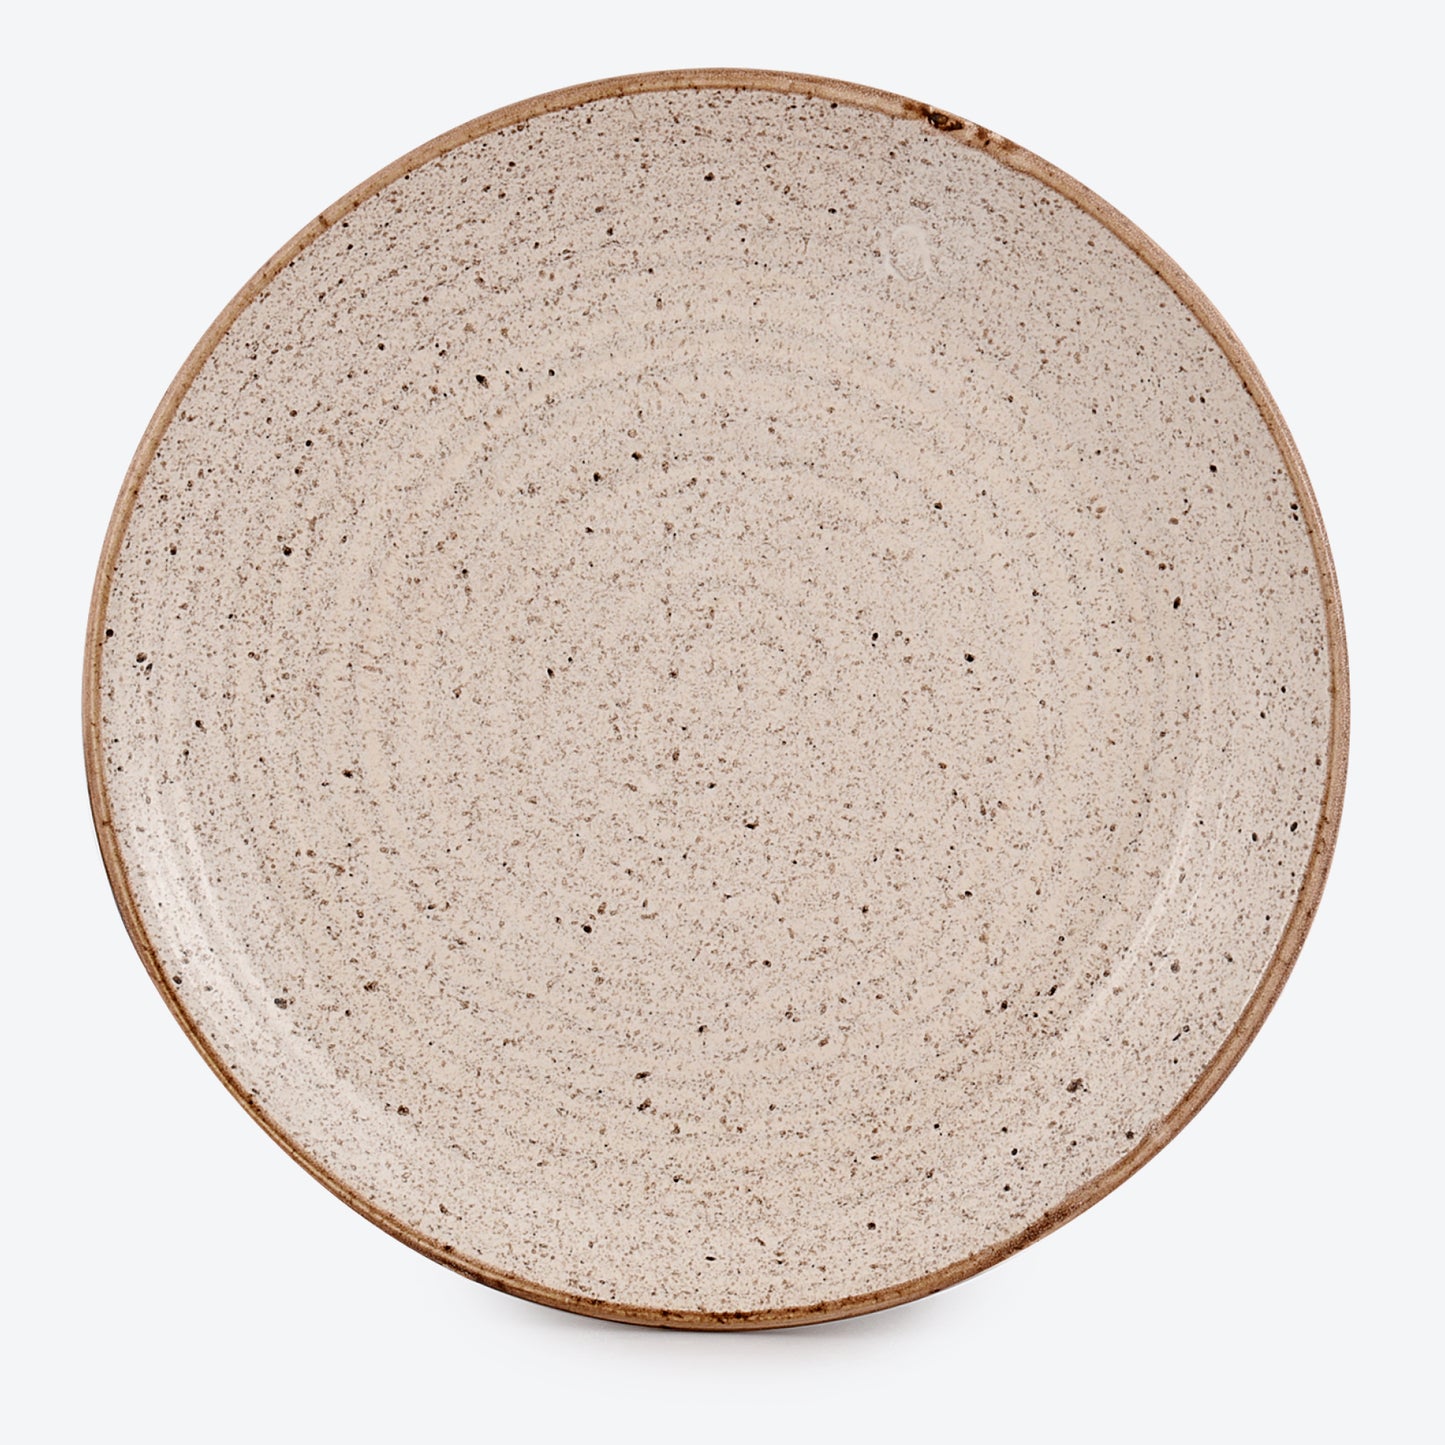 Freckled Plate (Set of 4 Plates)